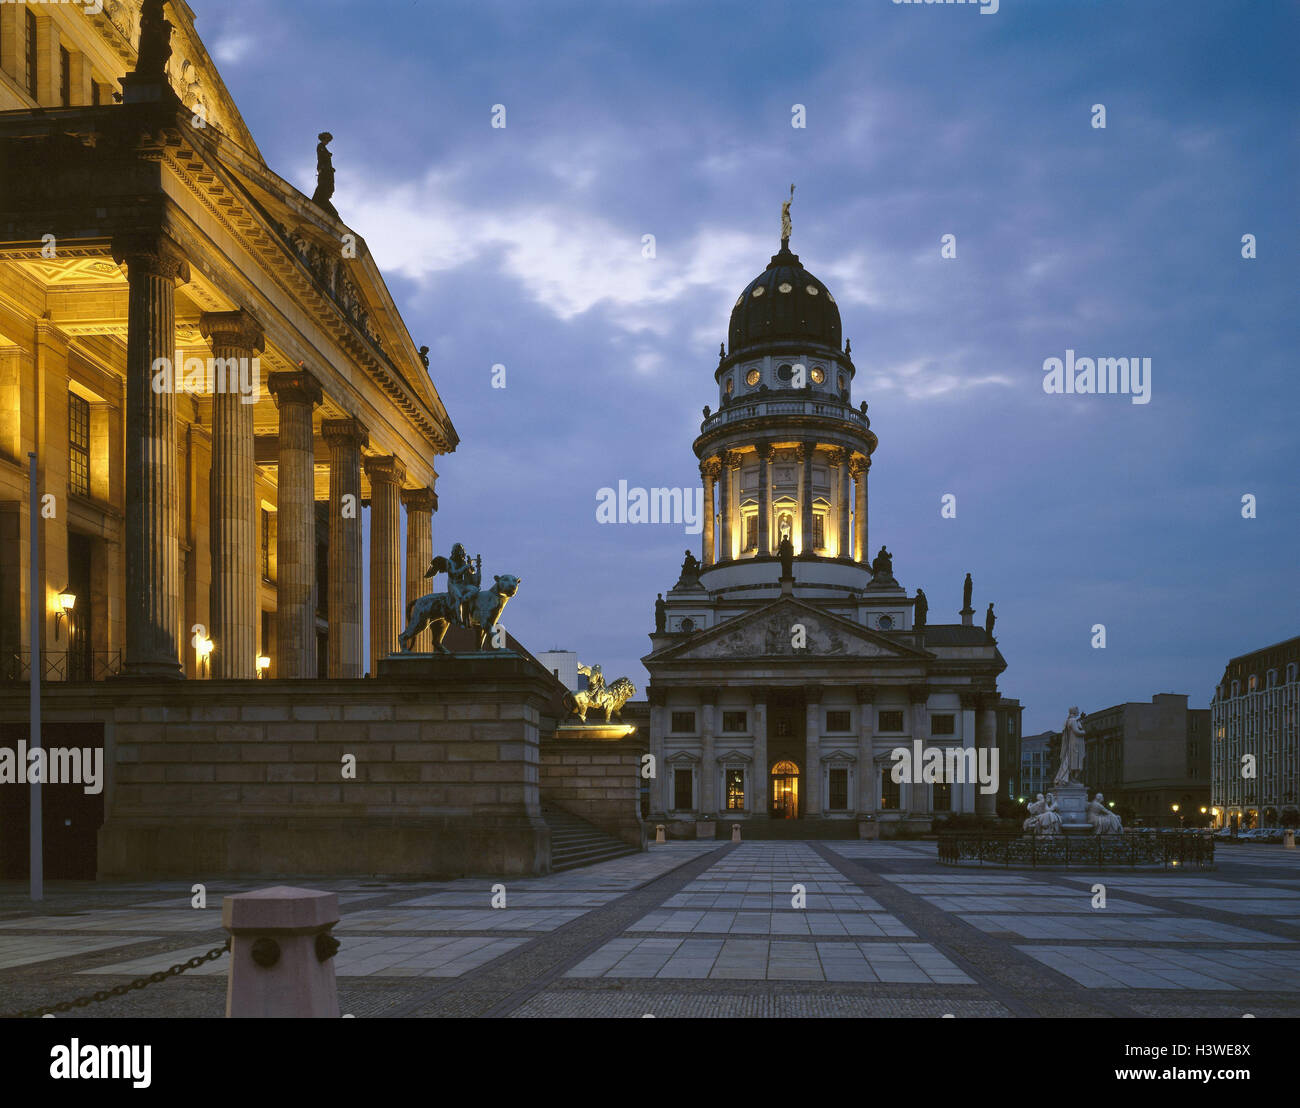 Germany, Berlin, gendarme's market, French cathedral, theatre, dusk capital, Berlin middle, space, place of interest, structures, building, in 1701-08, dome tower, culture, architecture, illuminateds, Stock Photo